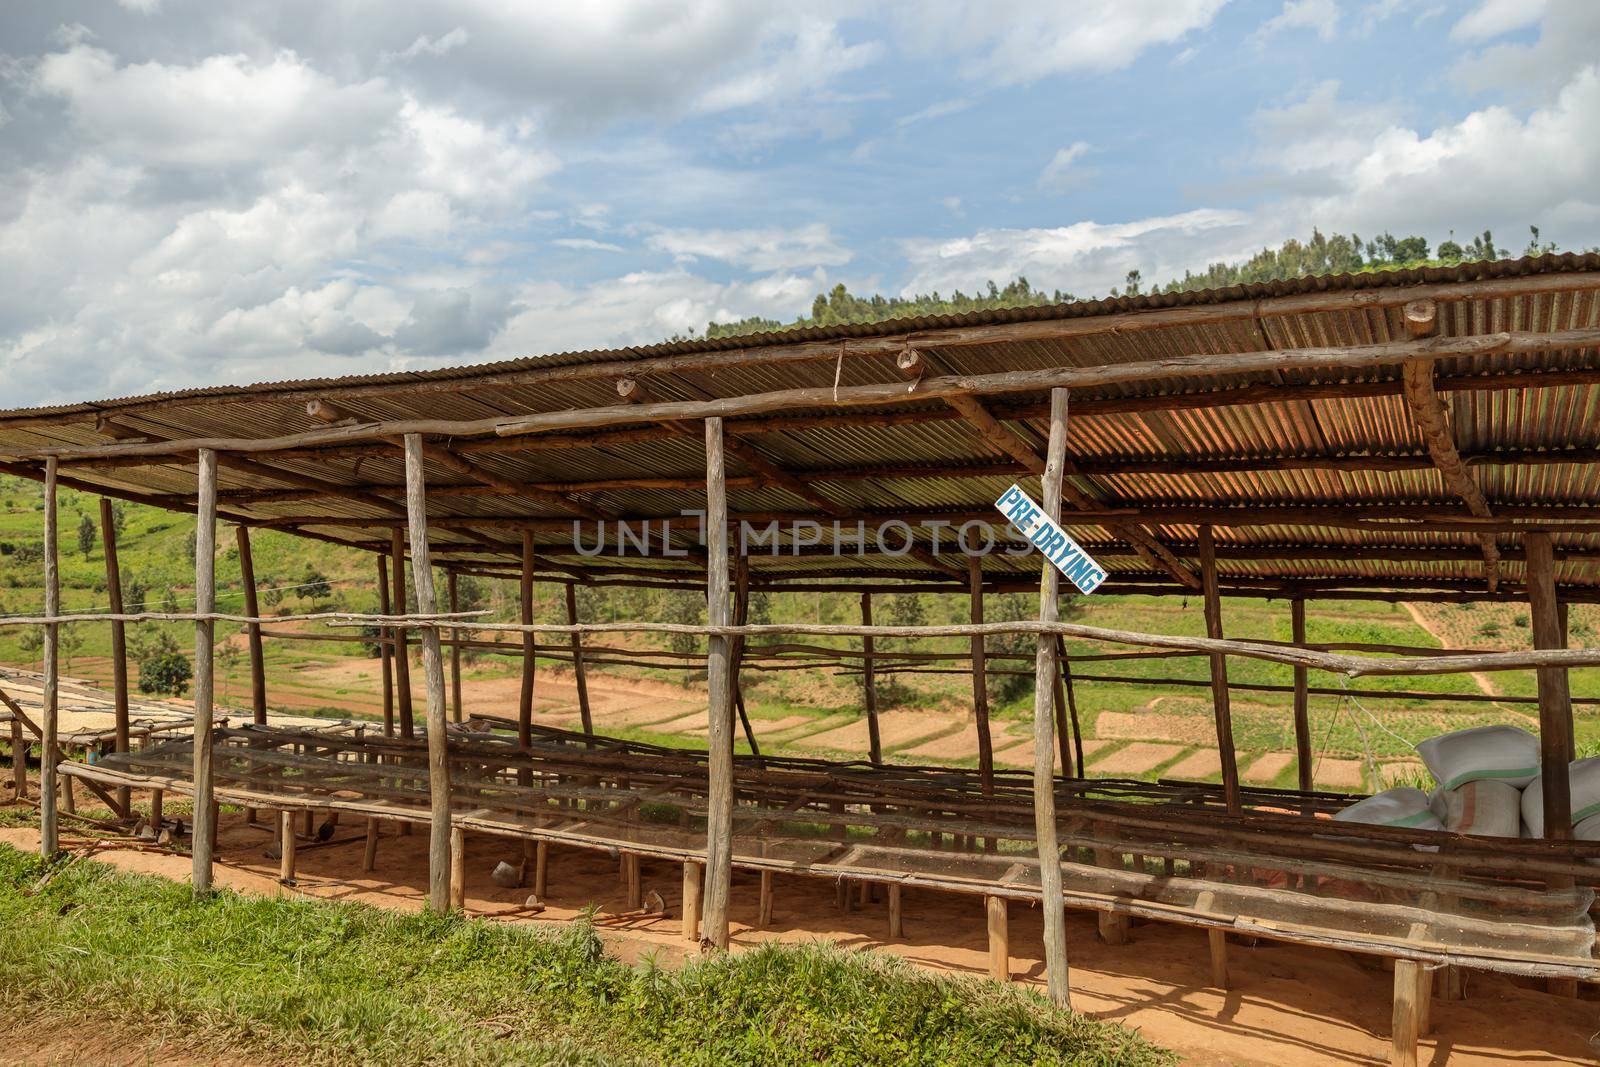 Wooden racks at pre-drying station at coffee farm in Africa